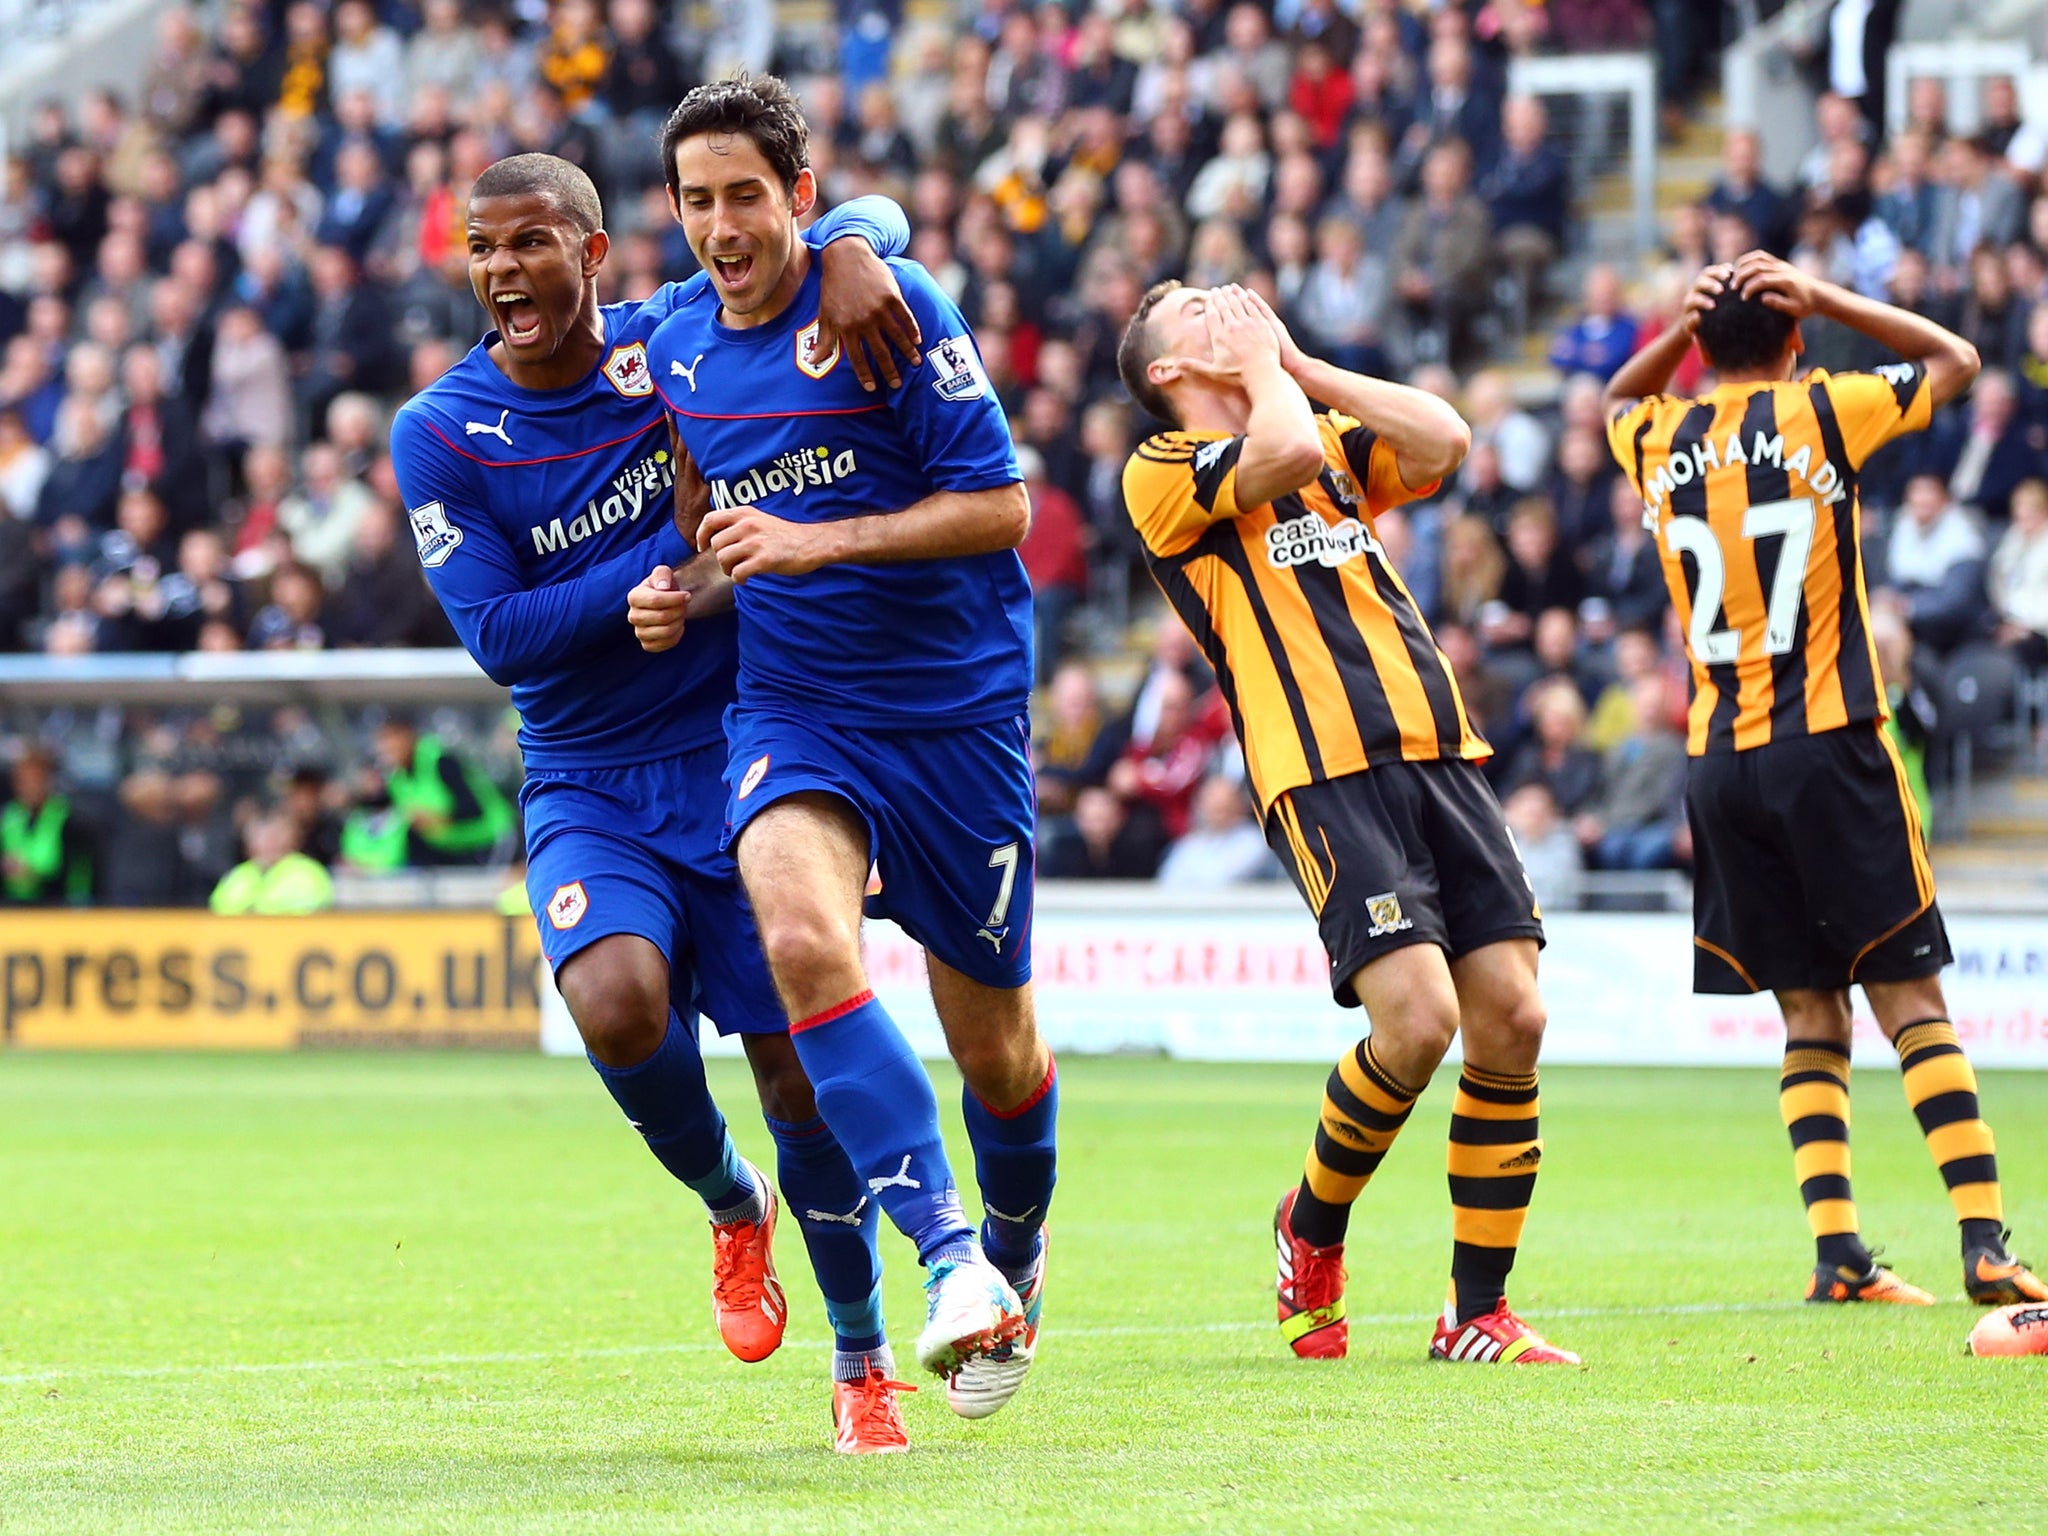 Peter Whittingham equalised for Cardiff, with the despair of the Hull players clearly visible